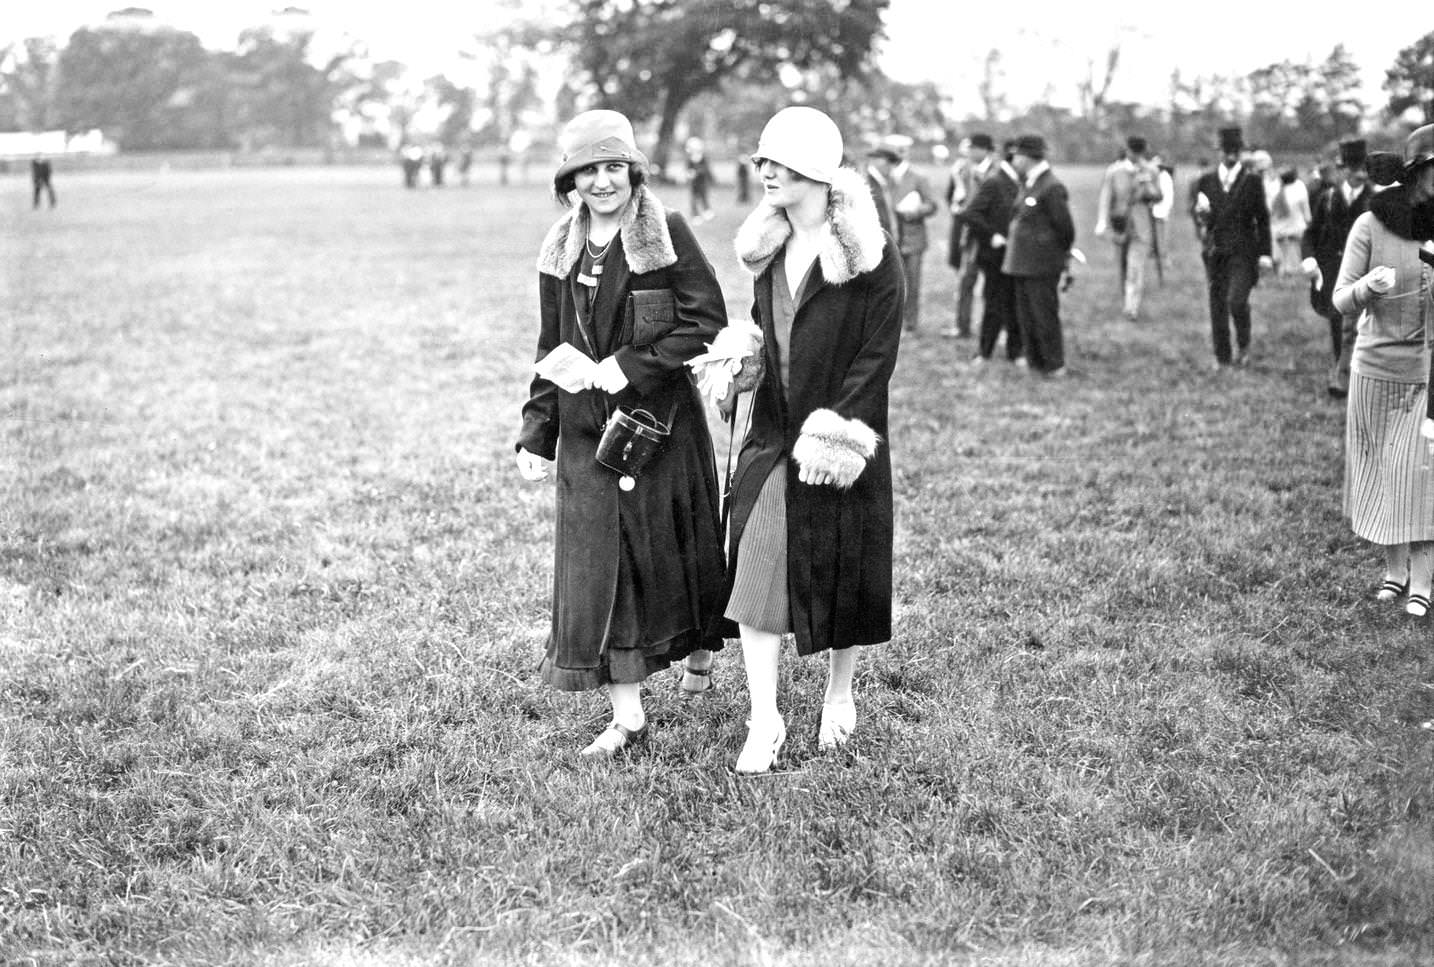 The Daly sisters in the paddock at Epsom Downs Racecourse, Surrey, 26th May 1925.